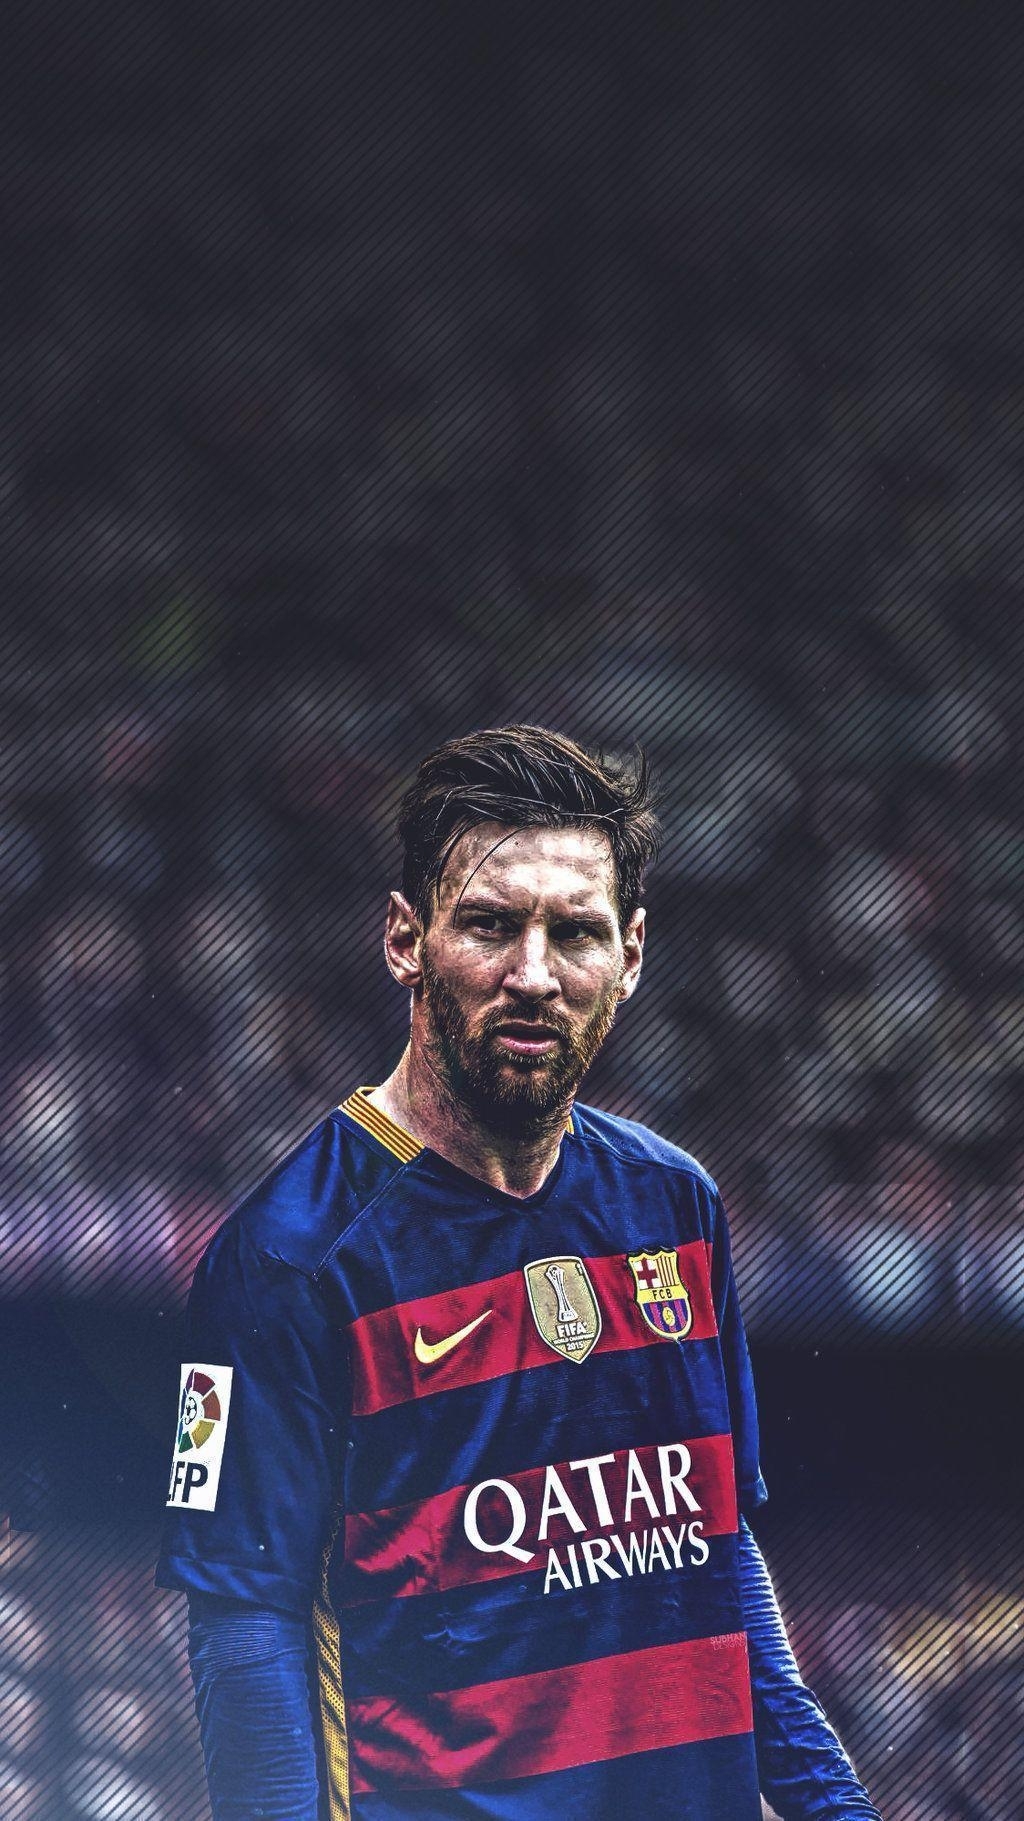 10 Best Lionel Messi Wallpaper 2016 FULL HD 1080p For PC ...